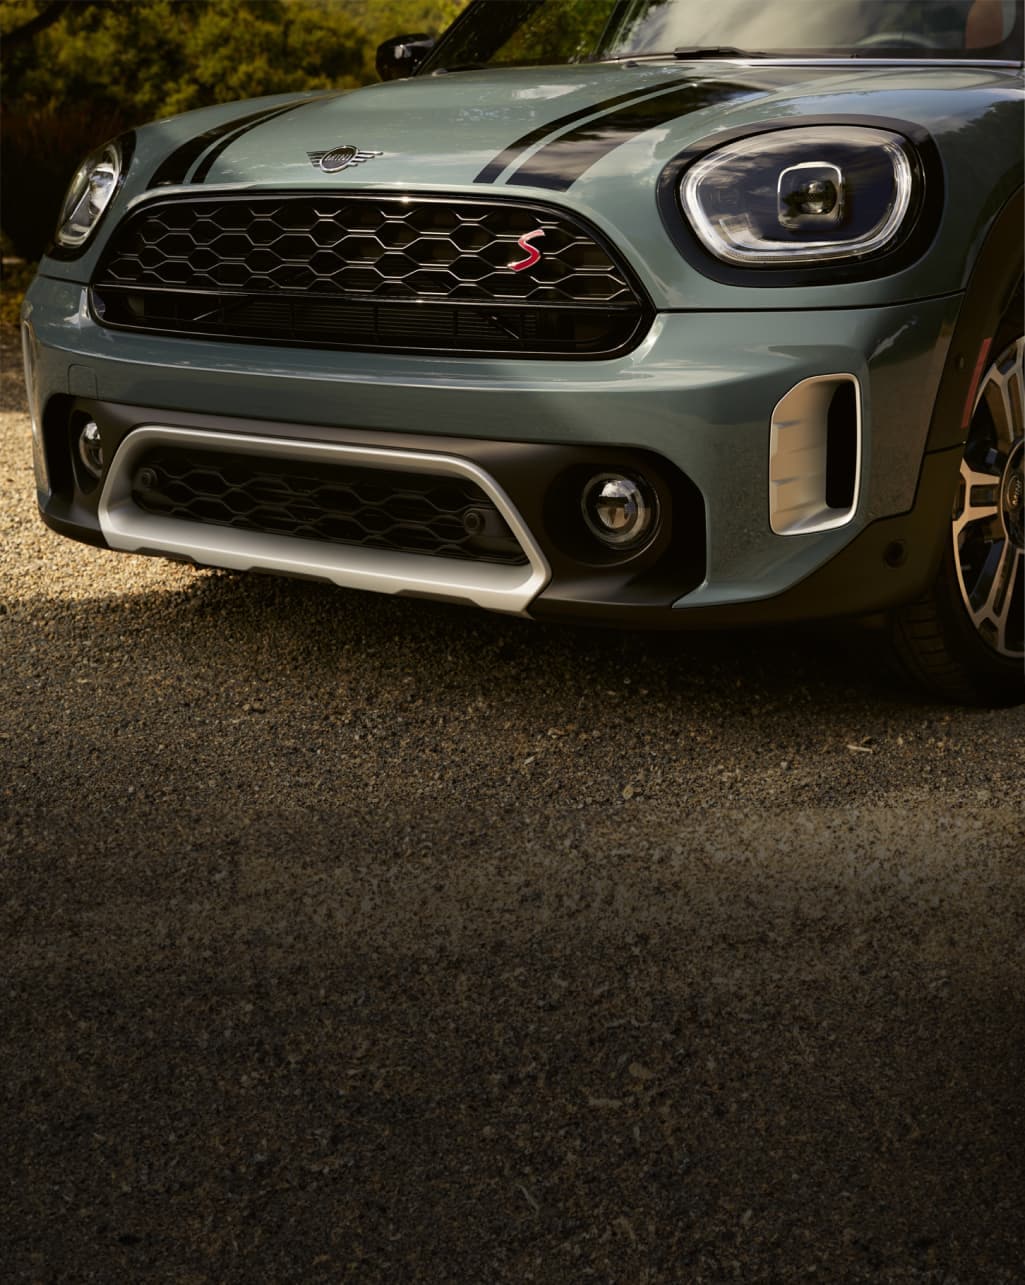 Three-quarters view of the front part of a dark green MINI Countryman parked on a pavement surface, including the patterned grille and LED headlights.